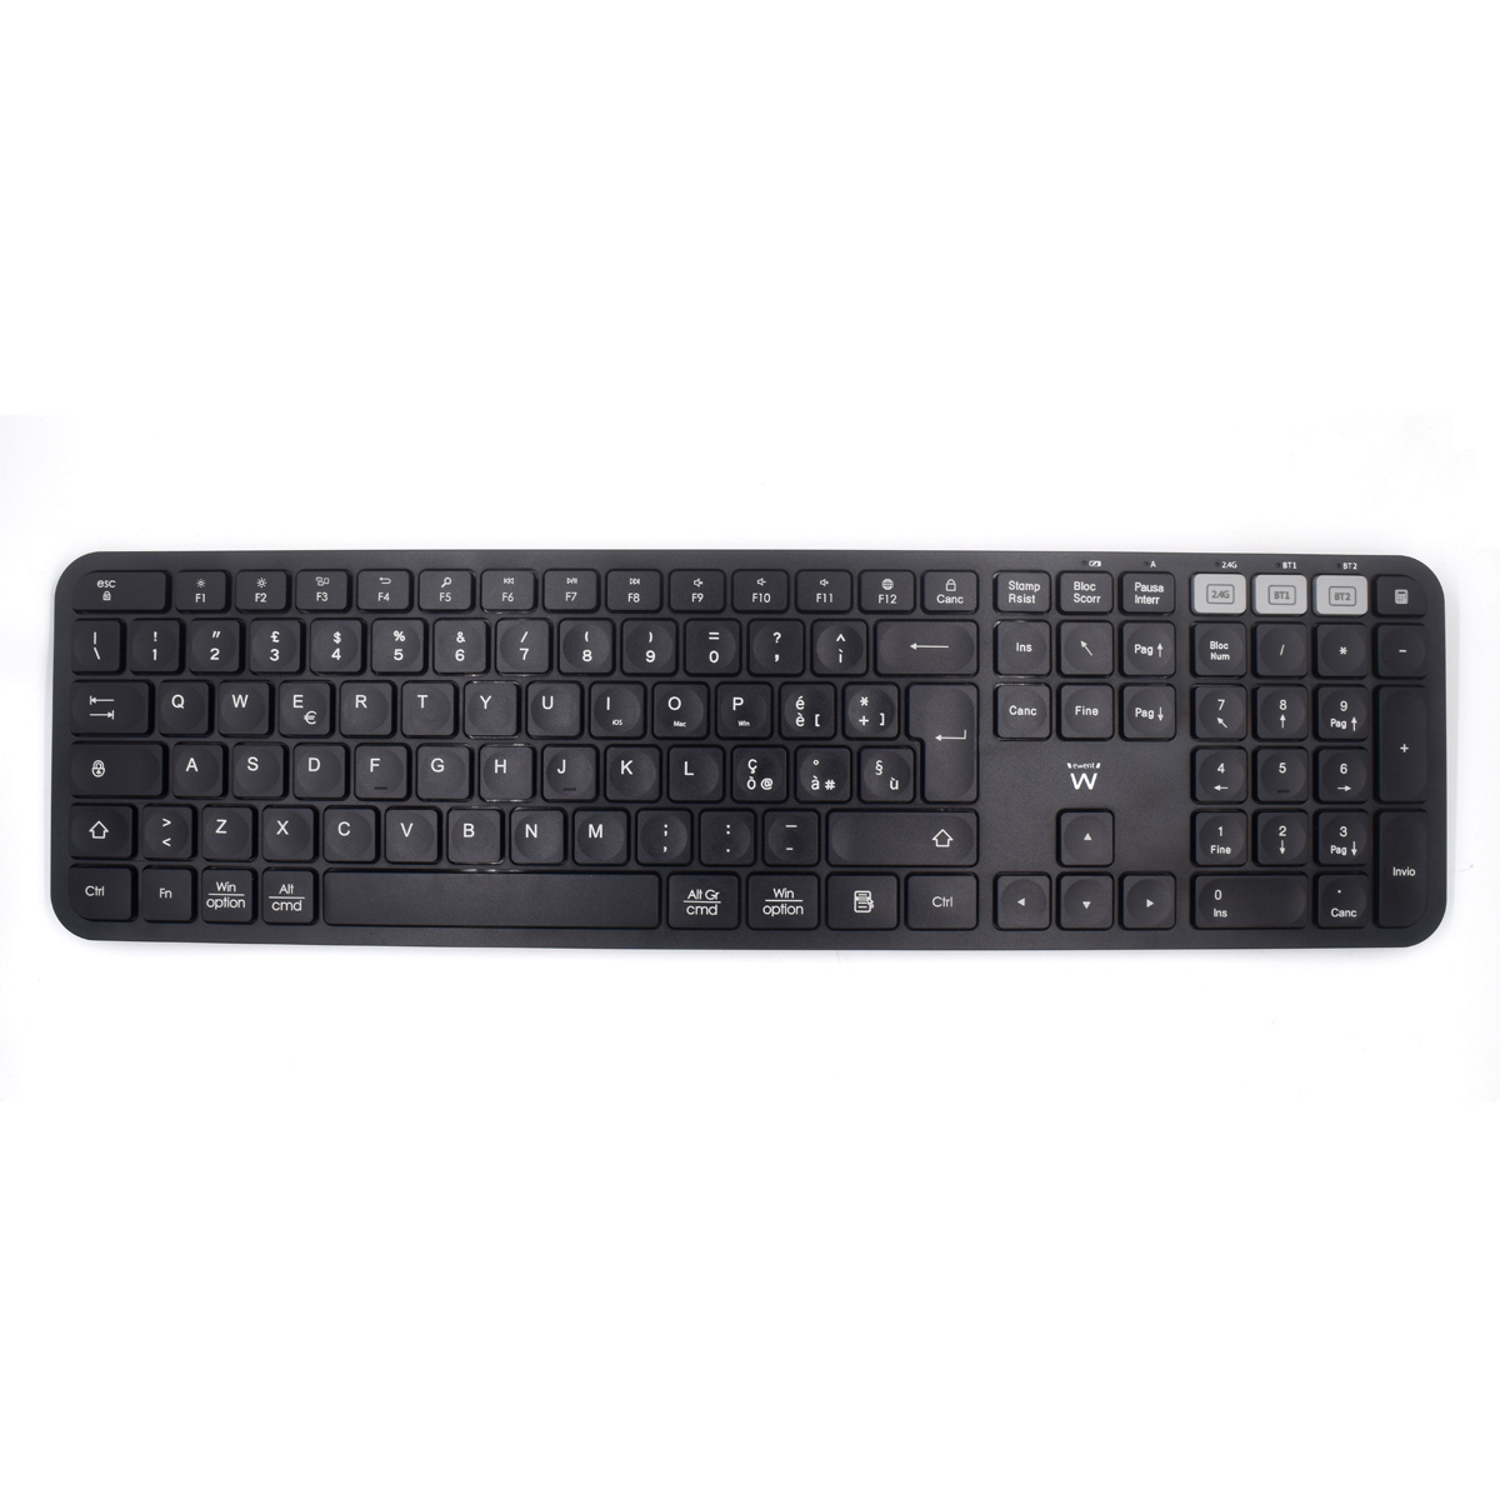 Verpletteren Baffle Oost Timor Wireless Multi-connect Keyboard for Windows, Mac OSx, iOS and Android with  IT-Layout | Ewent Eminent